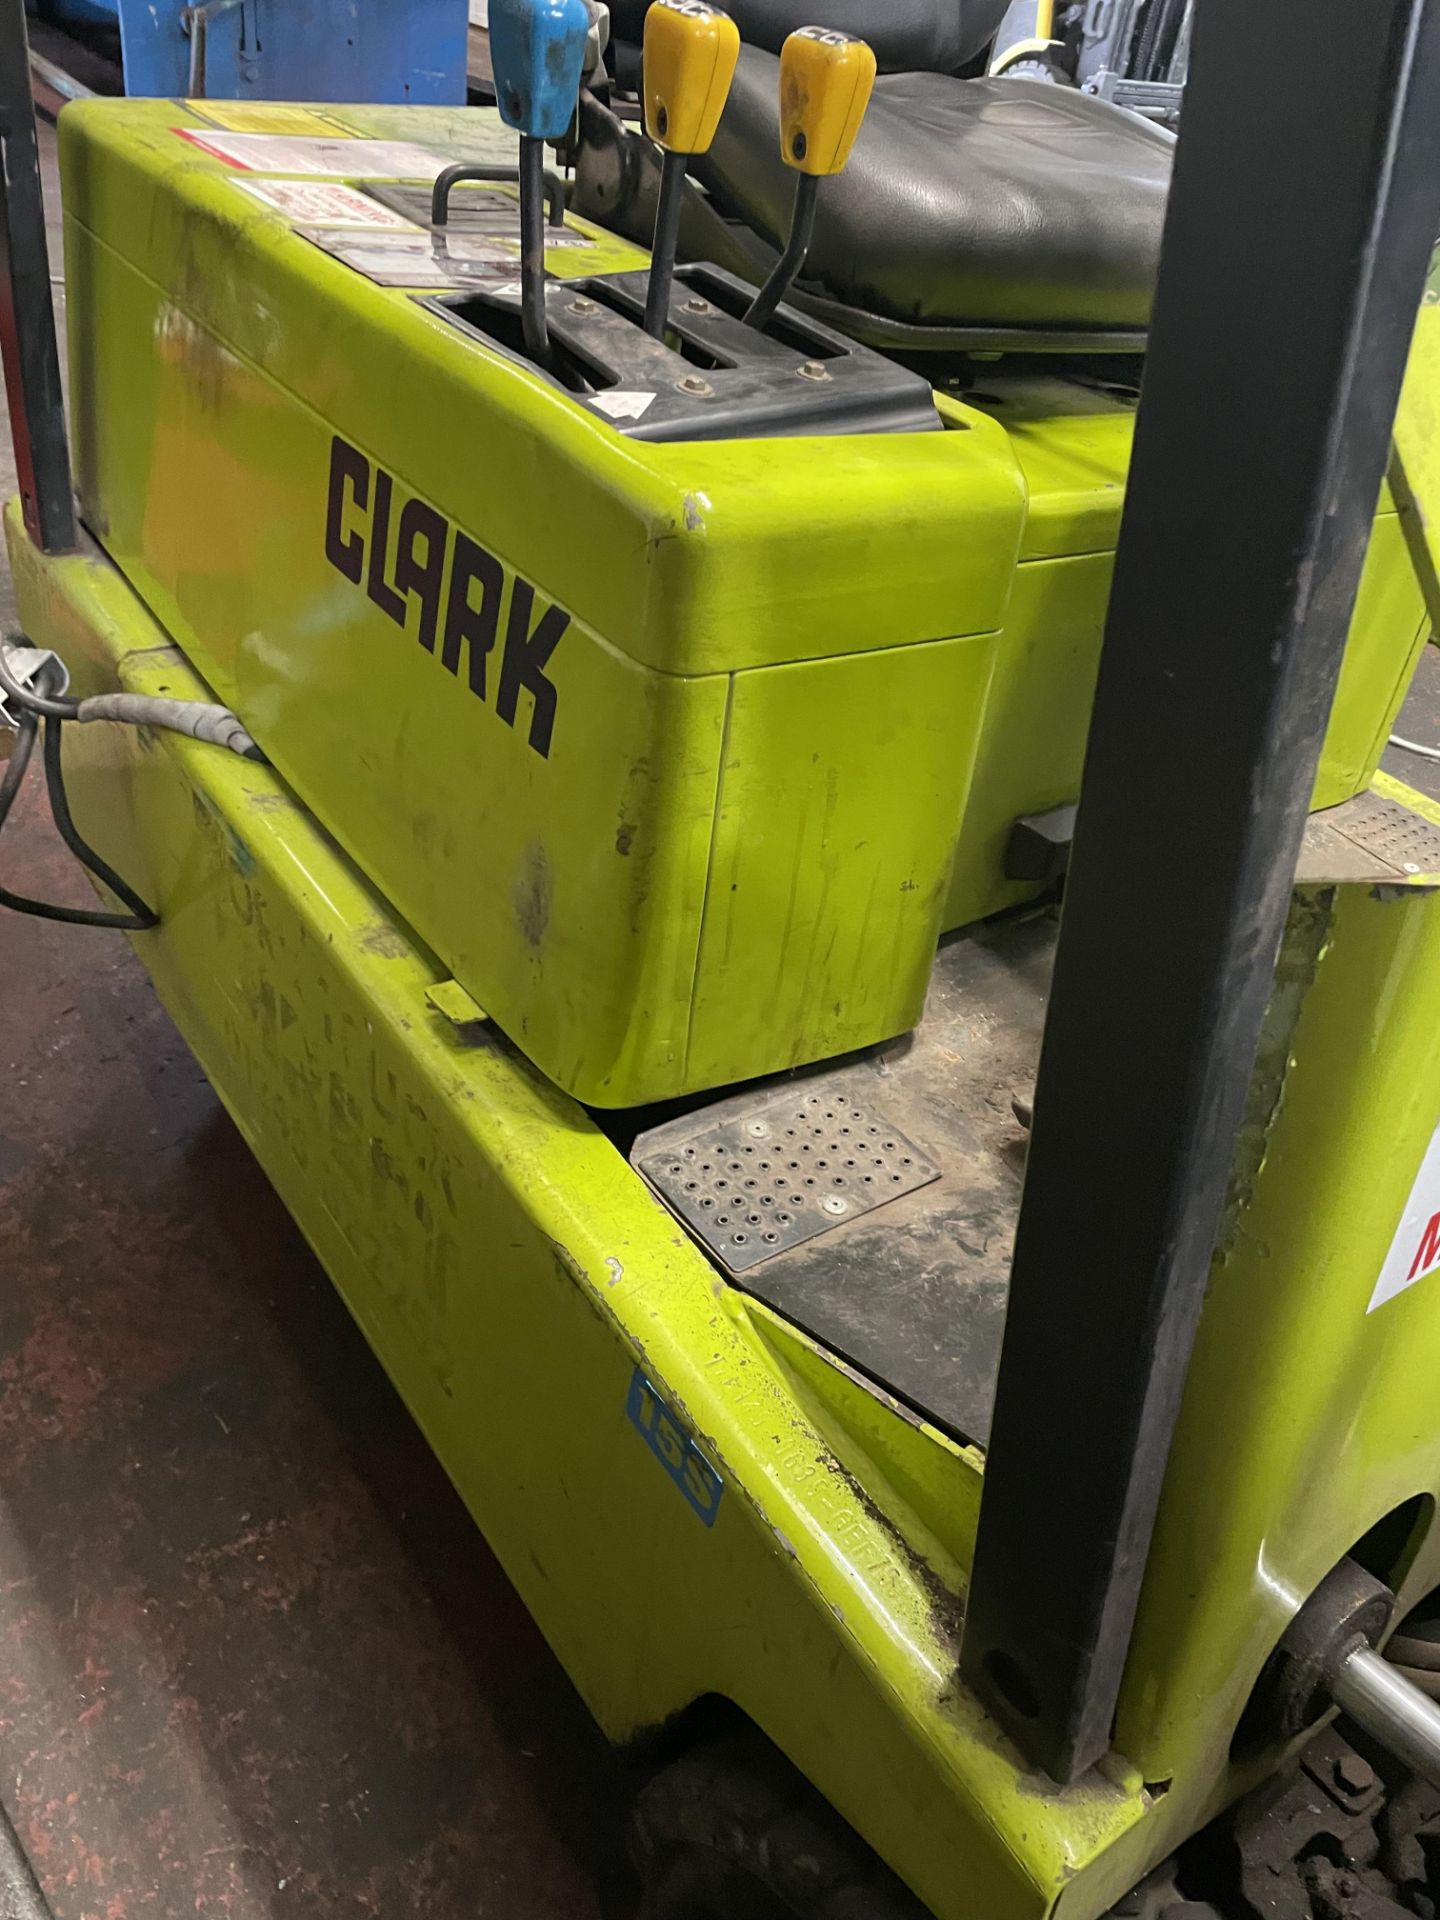 Clark TM15 3 Wheel Fork Lift Truck cw Charger - Image 3 of 10